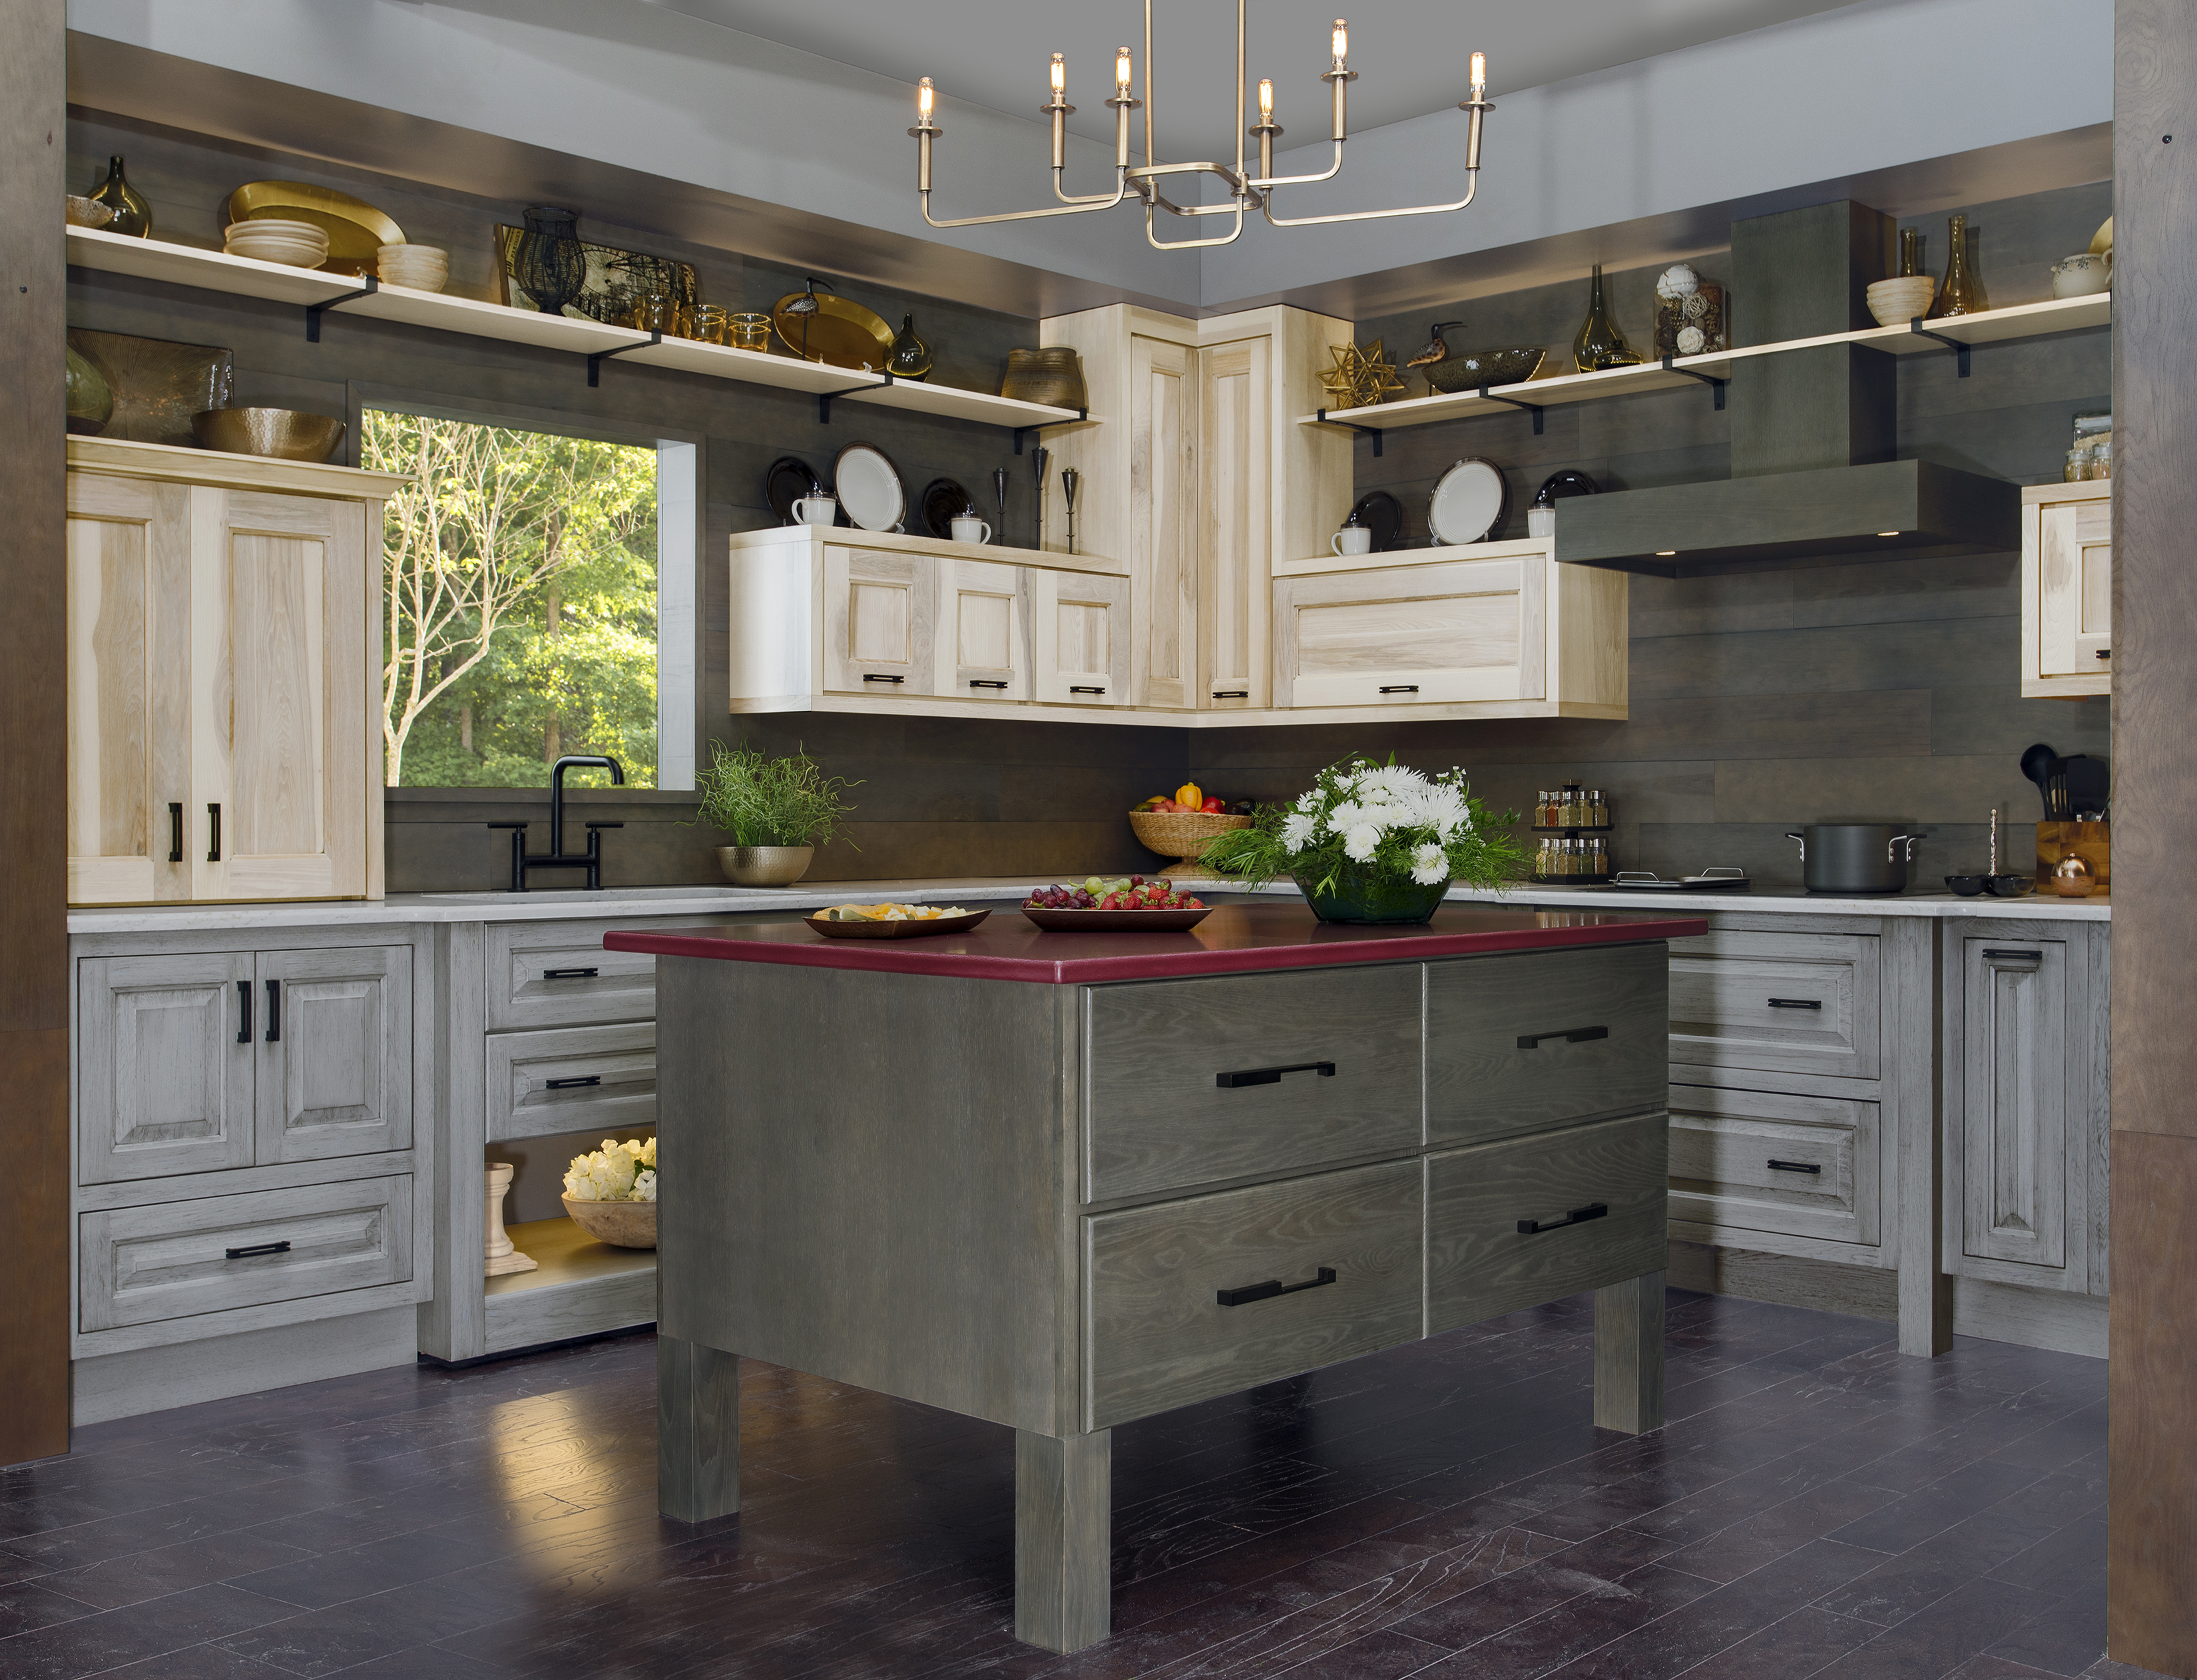 Commercial Cabinets, European Style Cabinets - RDM Industrial Products